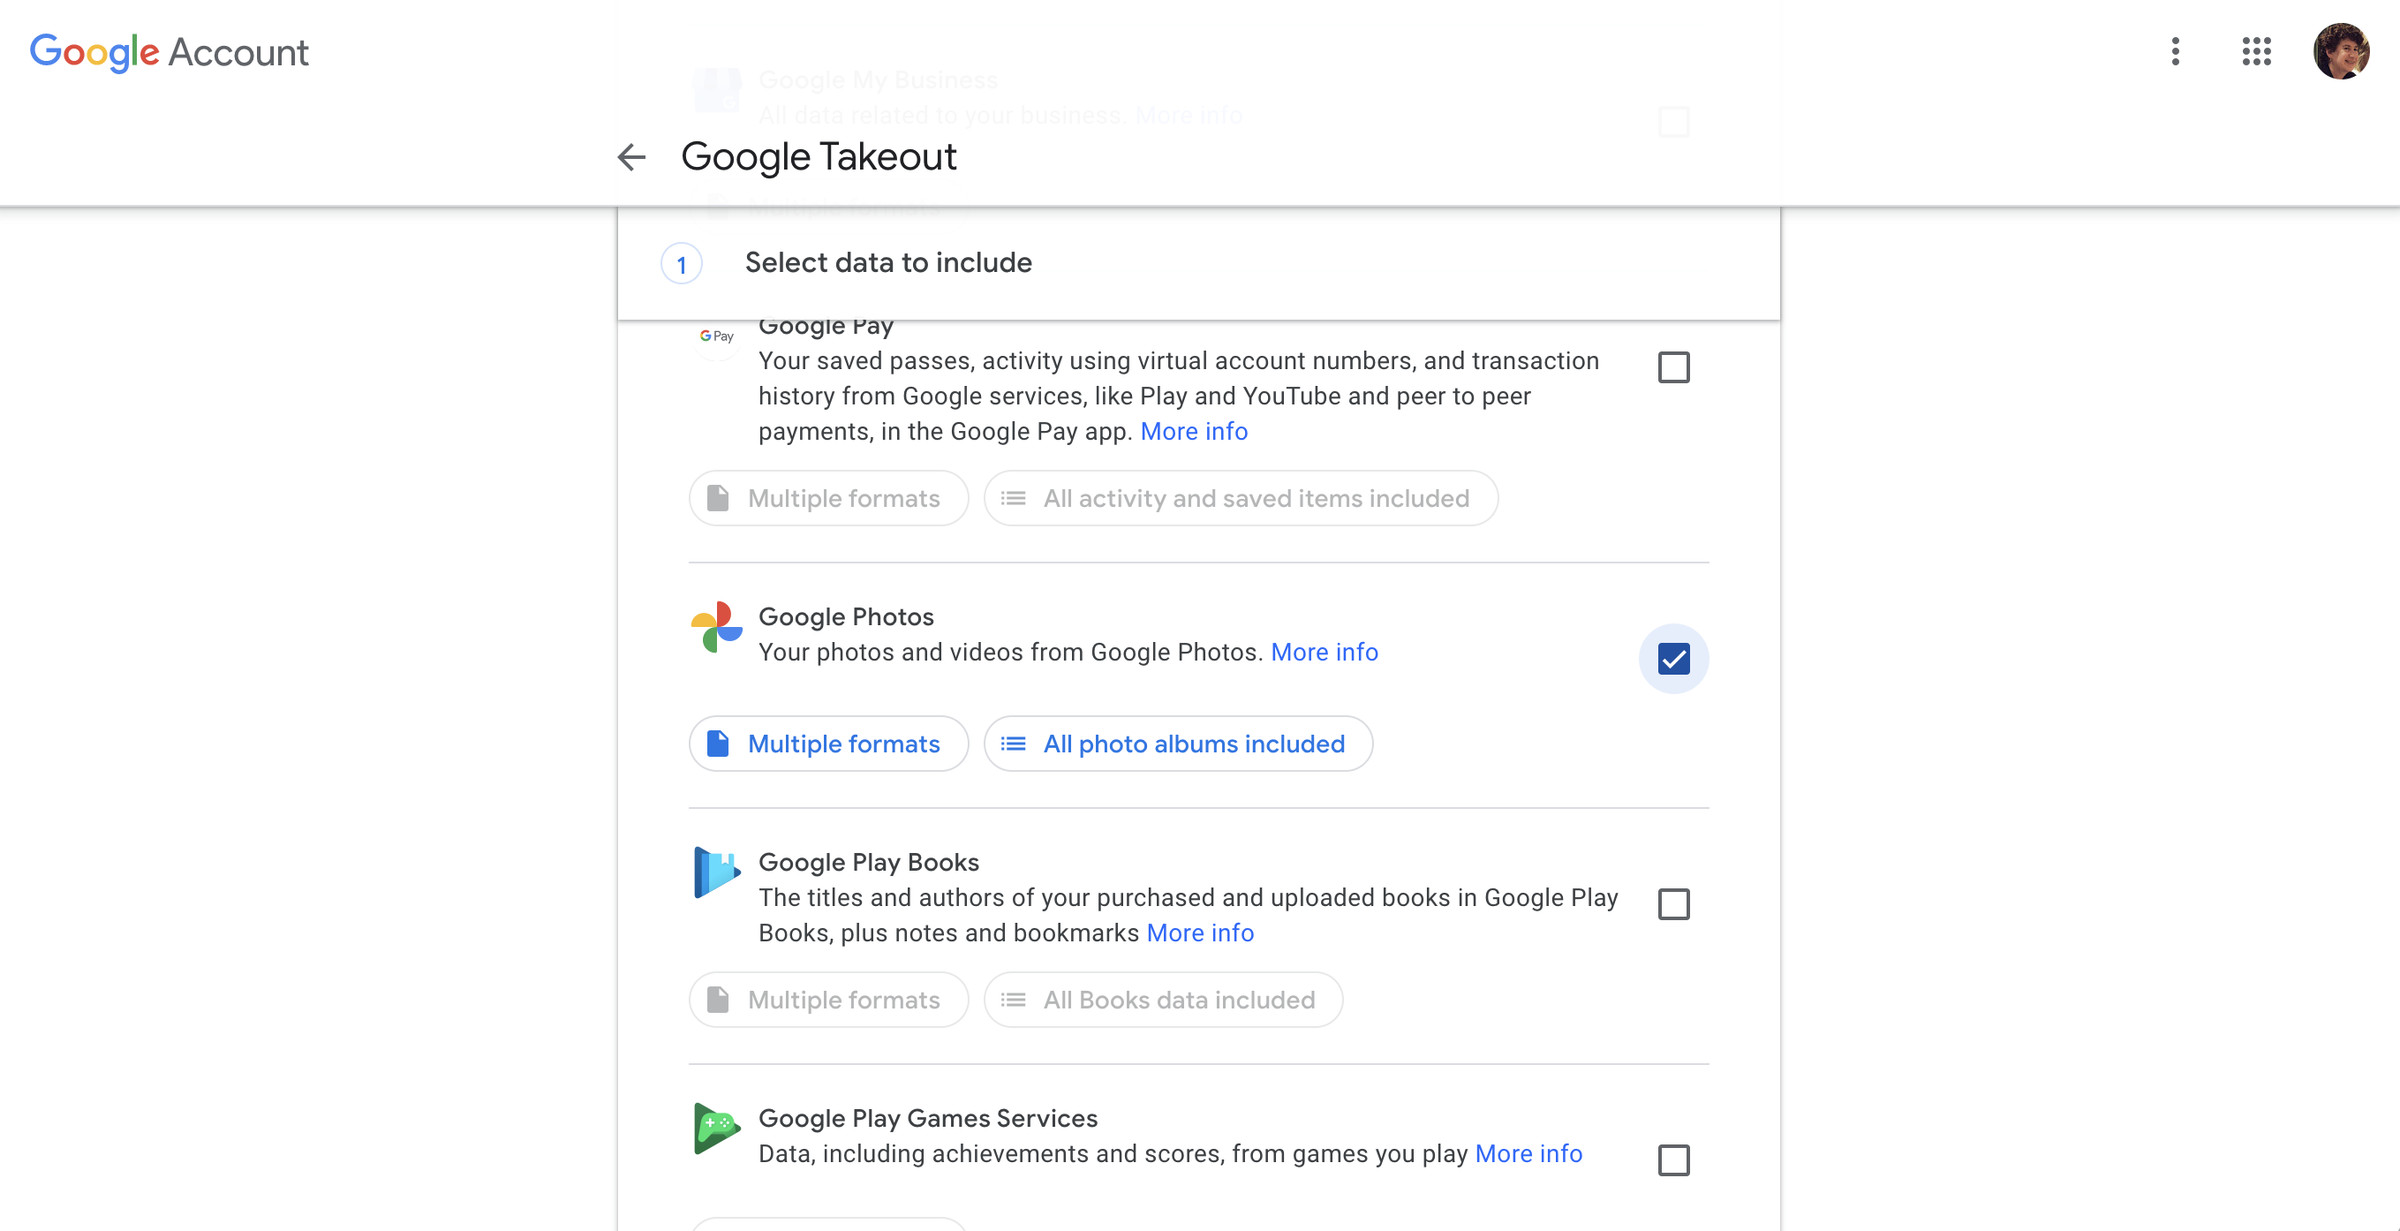 Once you’re in Google Takeout, scroll down the Google Photos and select it.